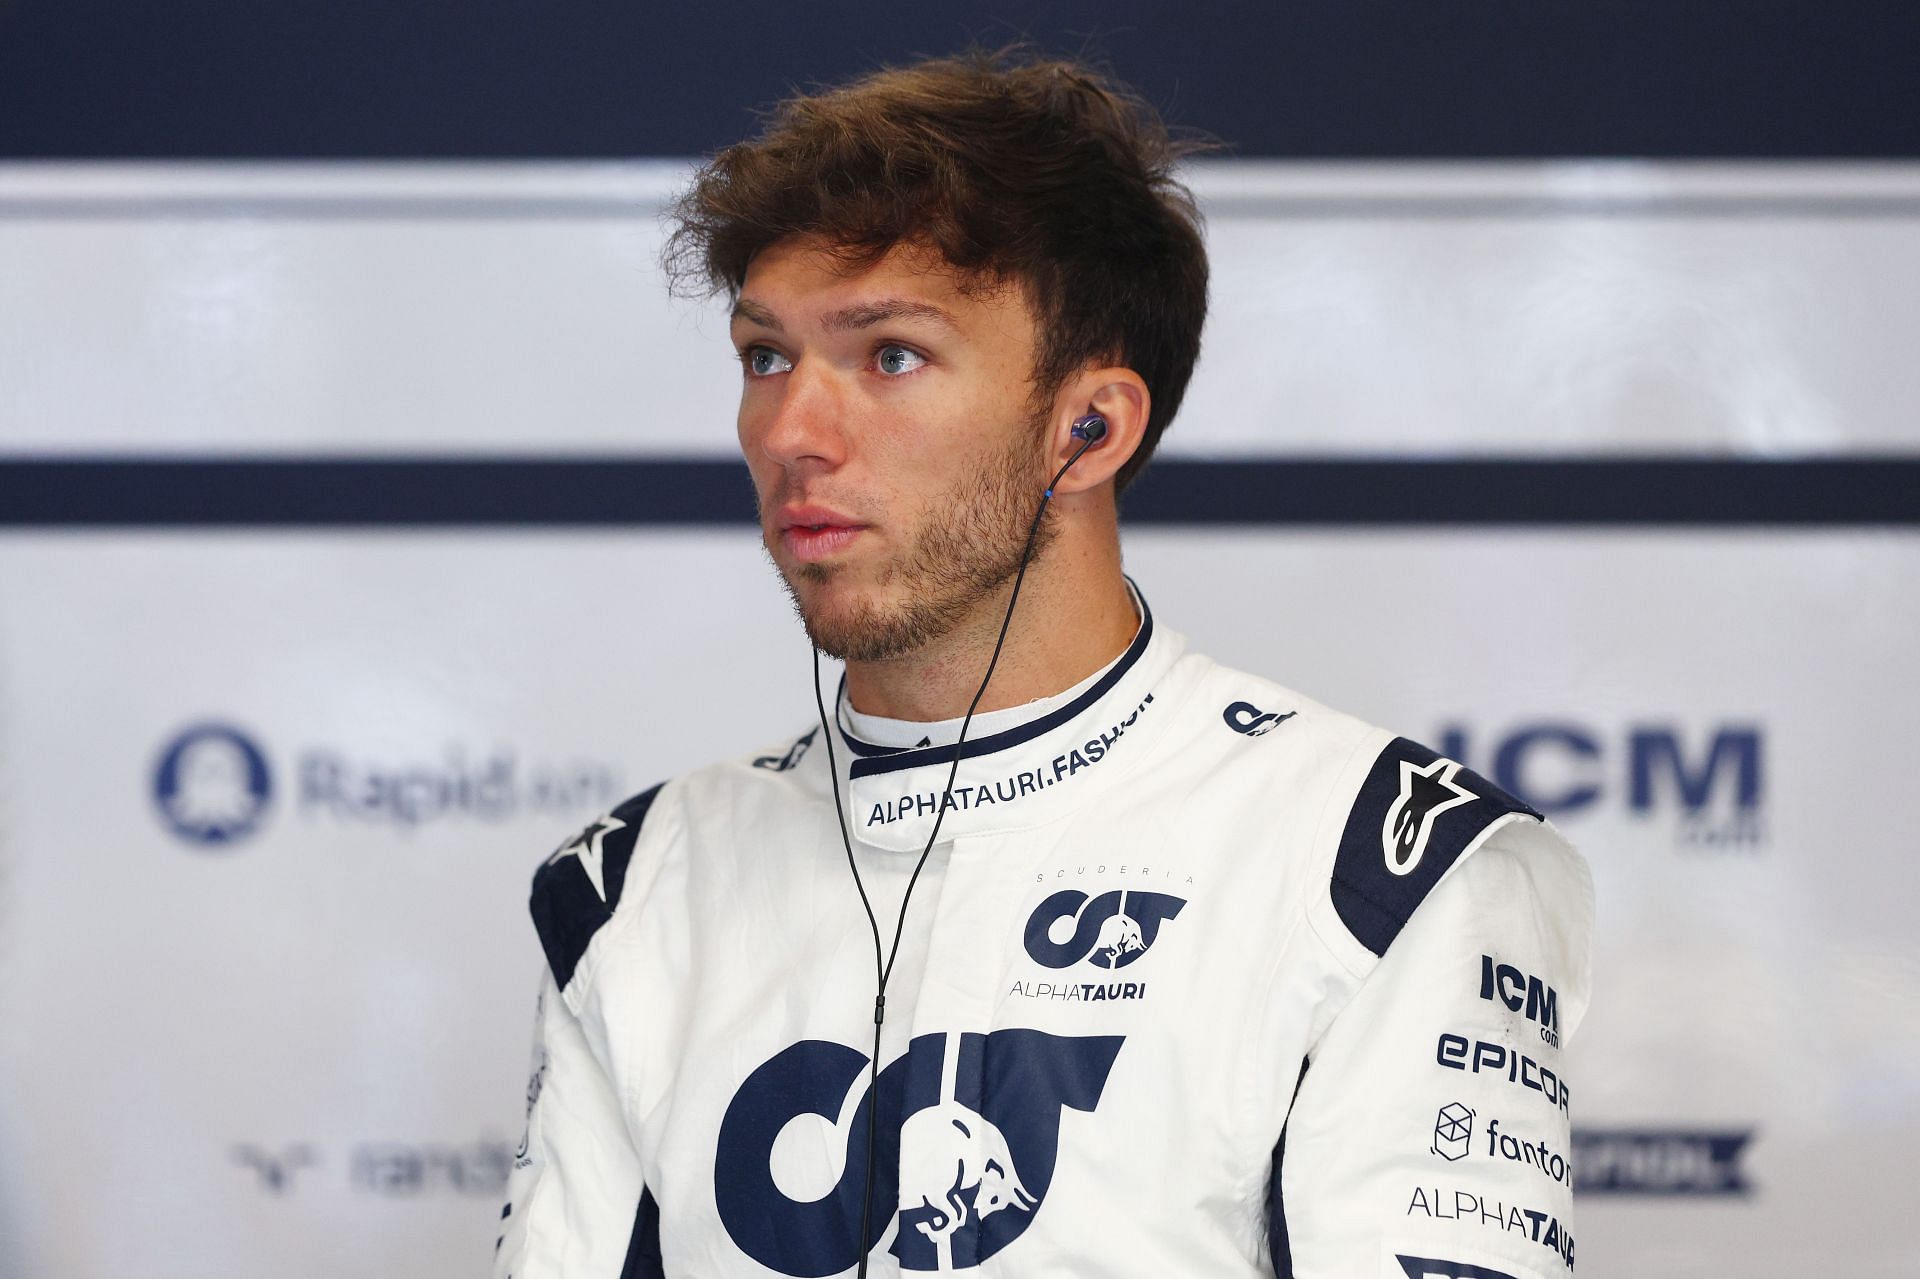 Pierre Gasly had a disappointing weekend in Canada